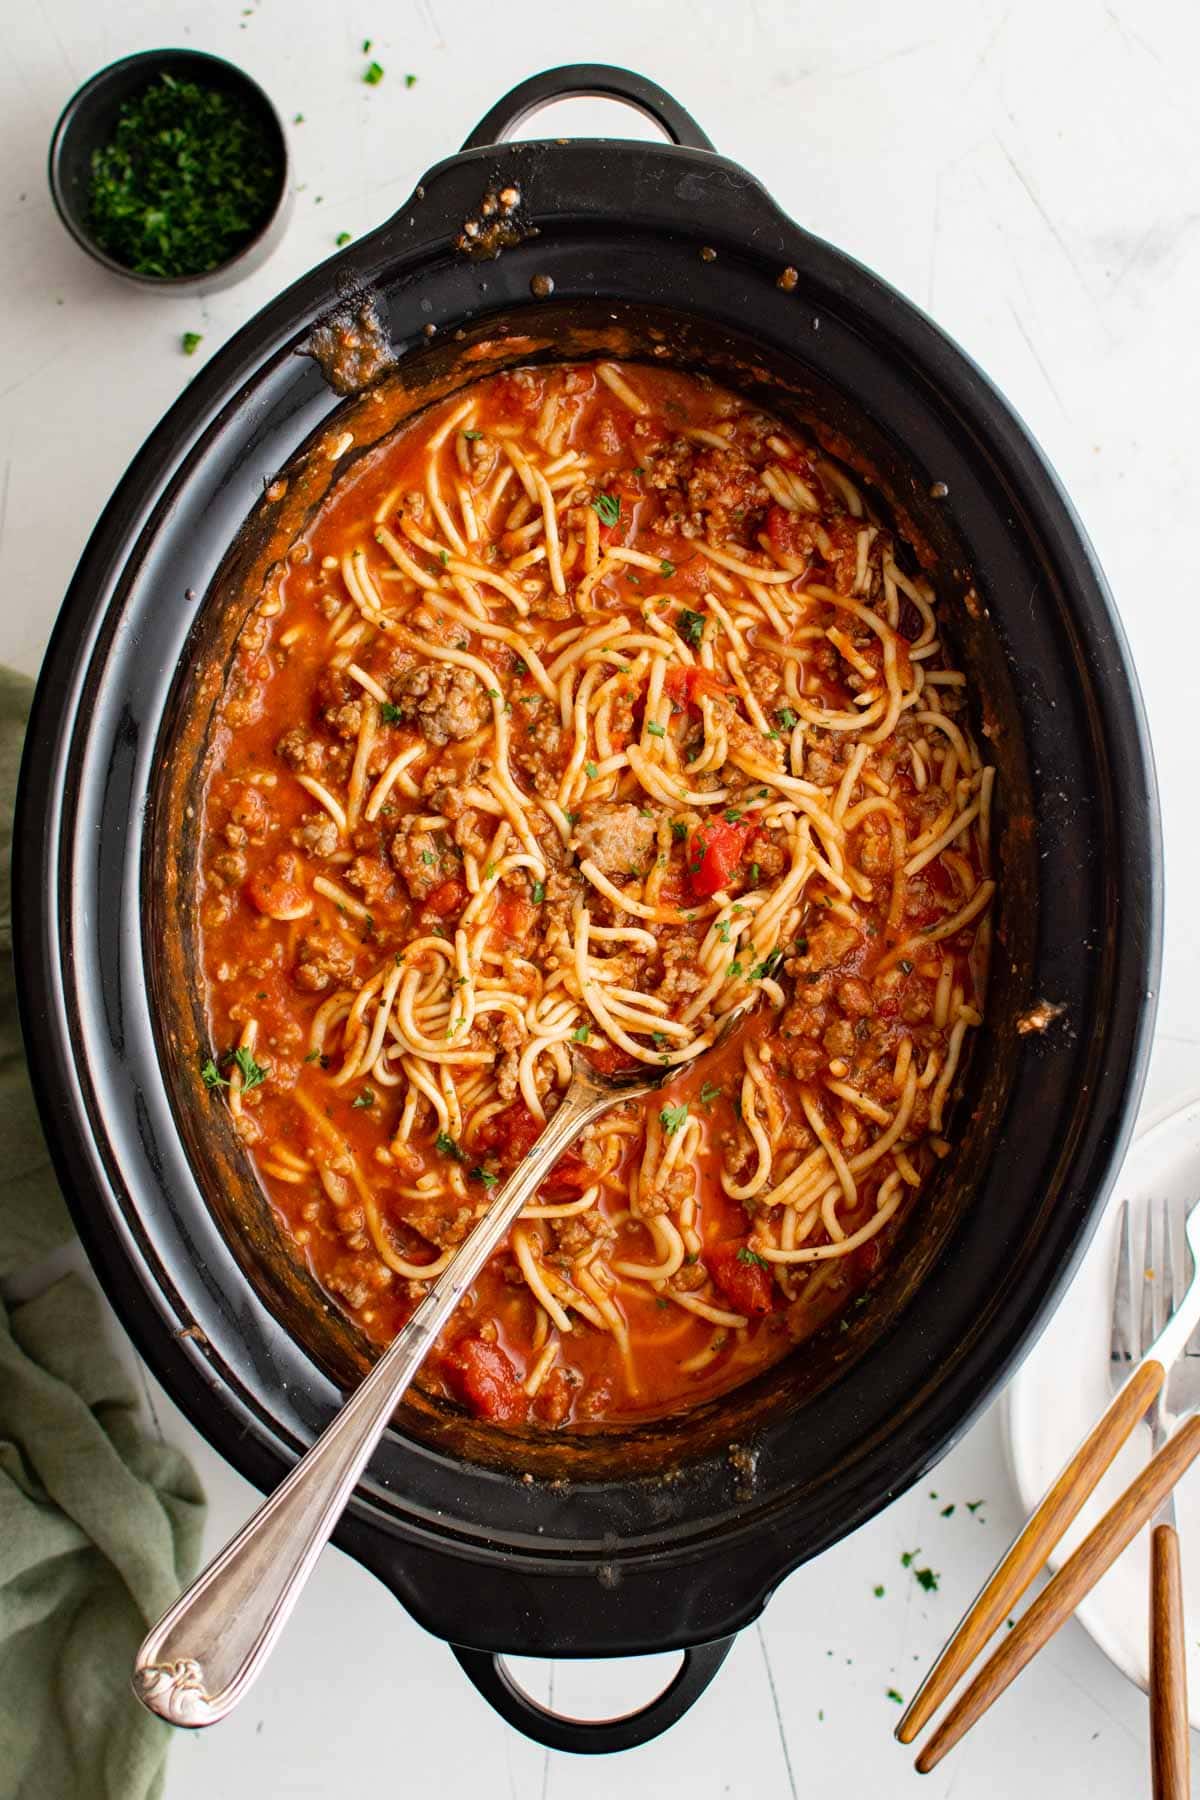 Slow cooker with spaghetti noodles and sauce and a large serving spoon.